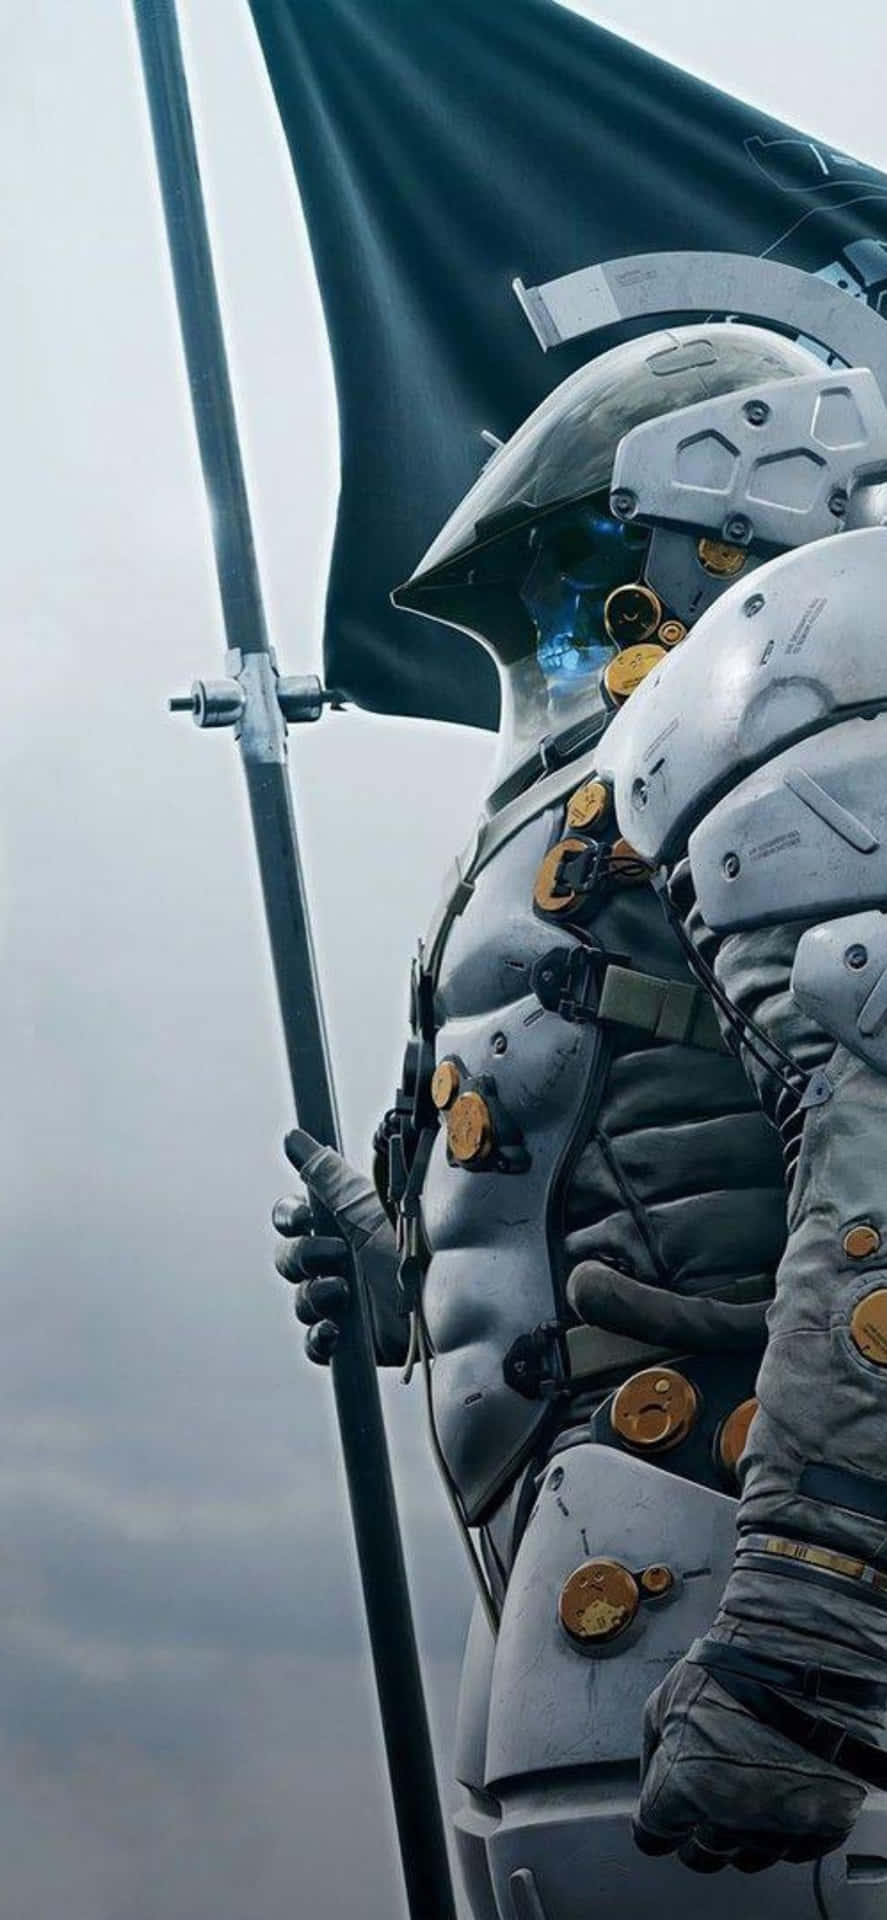 Welcome to the world of Death Stranding on the Iphone Xs Max